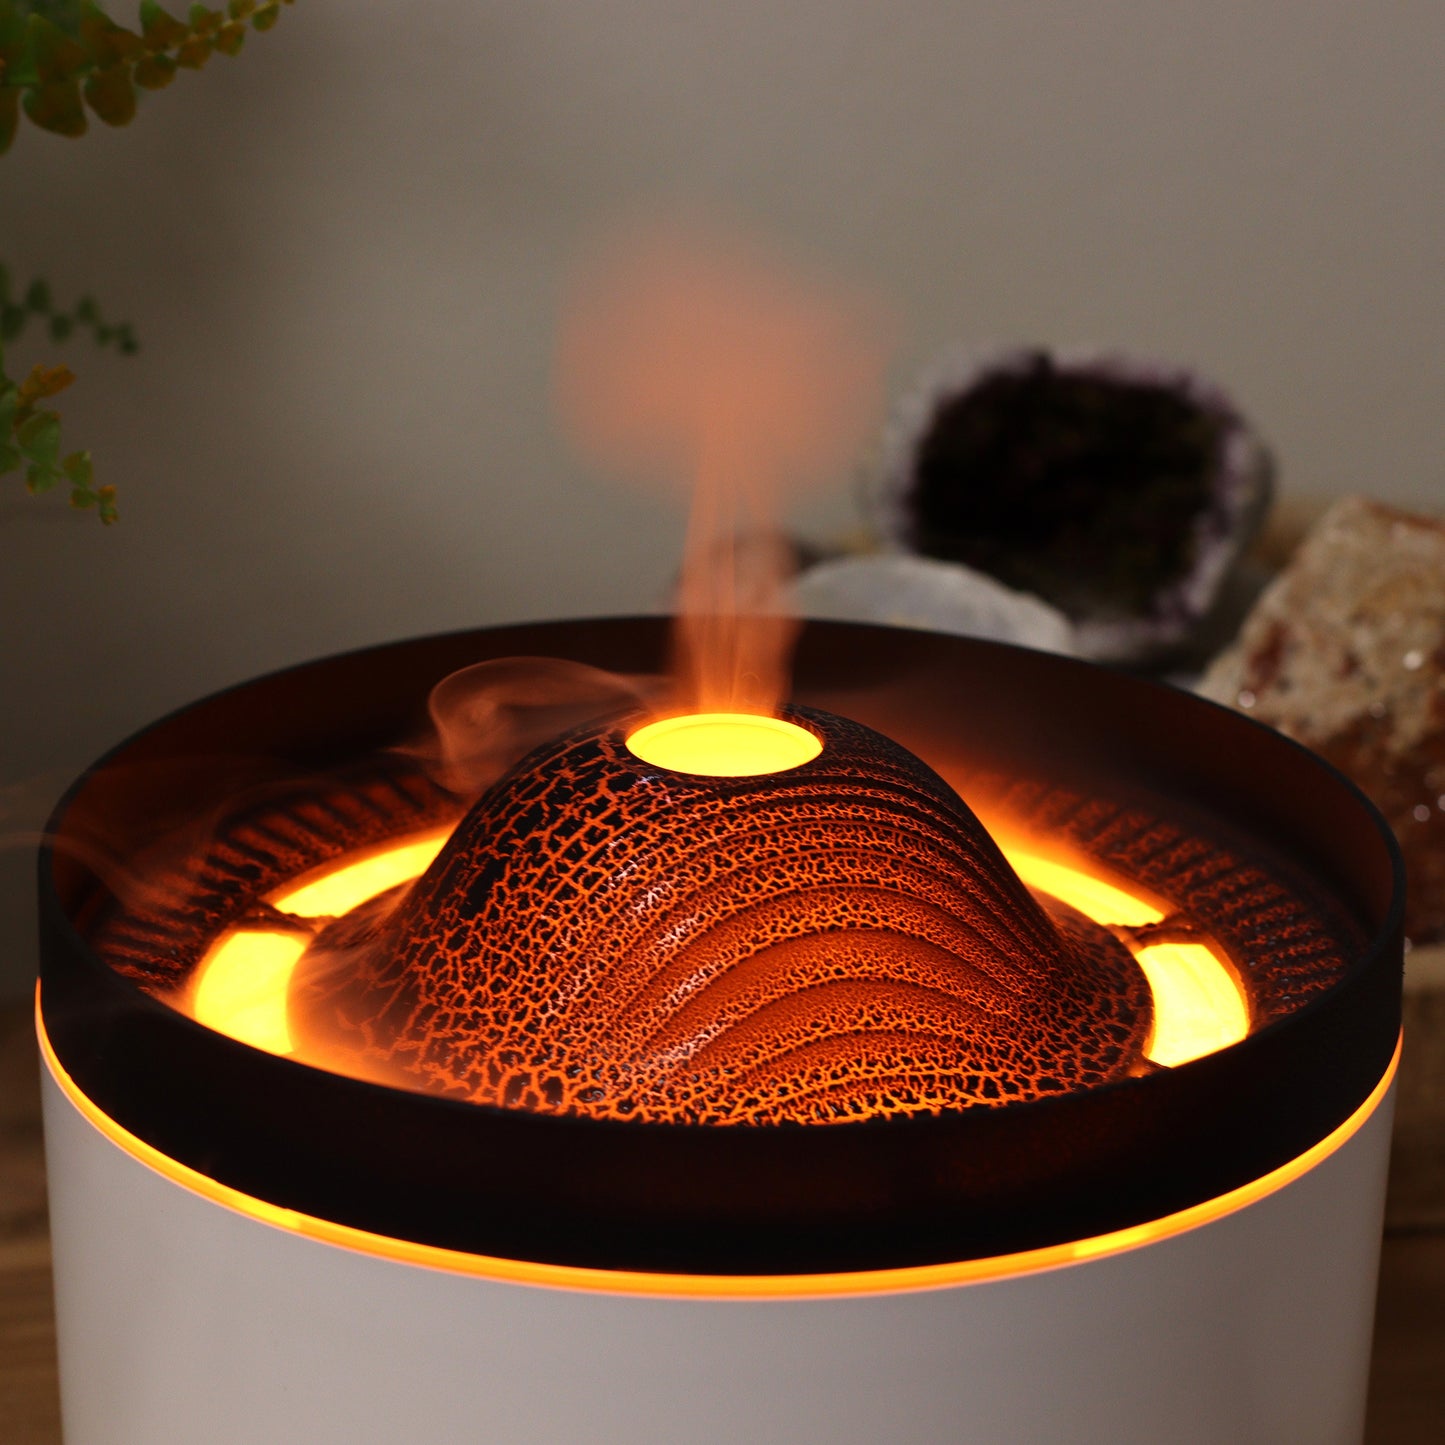 Large Volcano Effect Aroma Diffuser